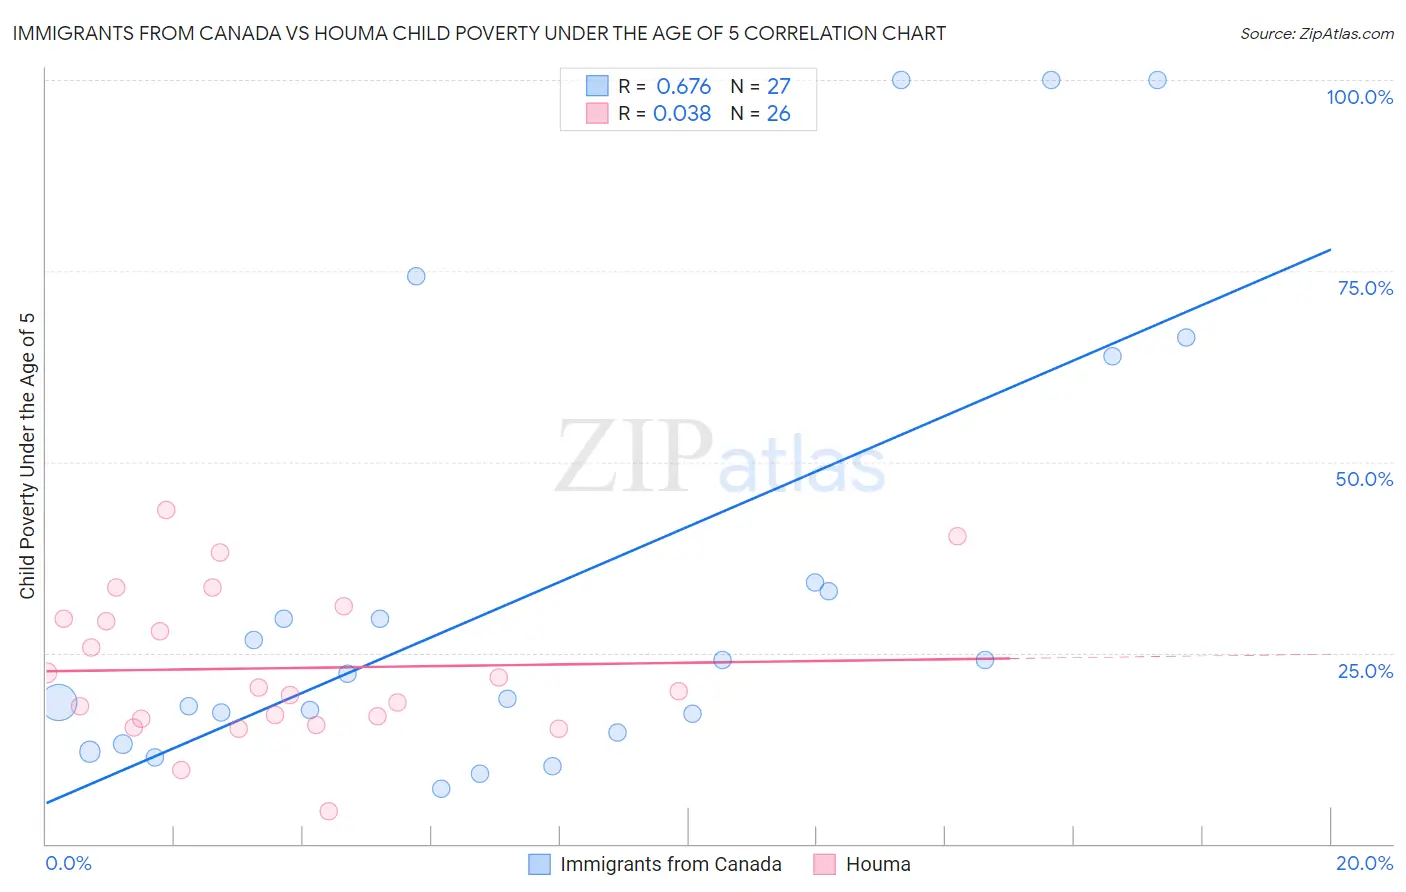 Immigrants from Canada vs Houma Child Poverty Under the Age of 5